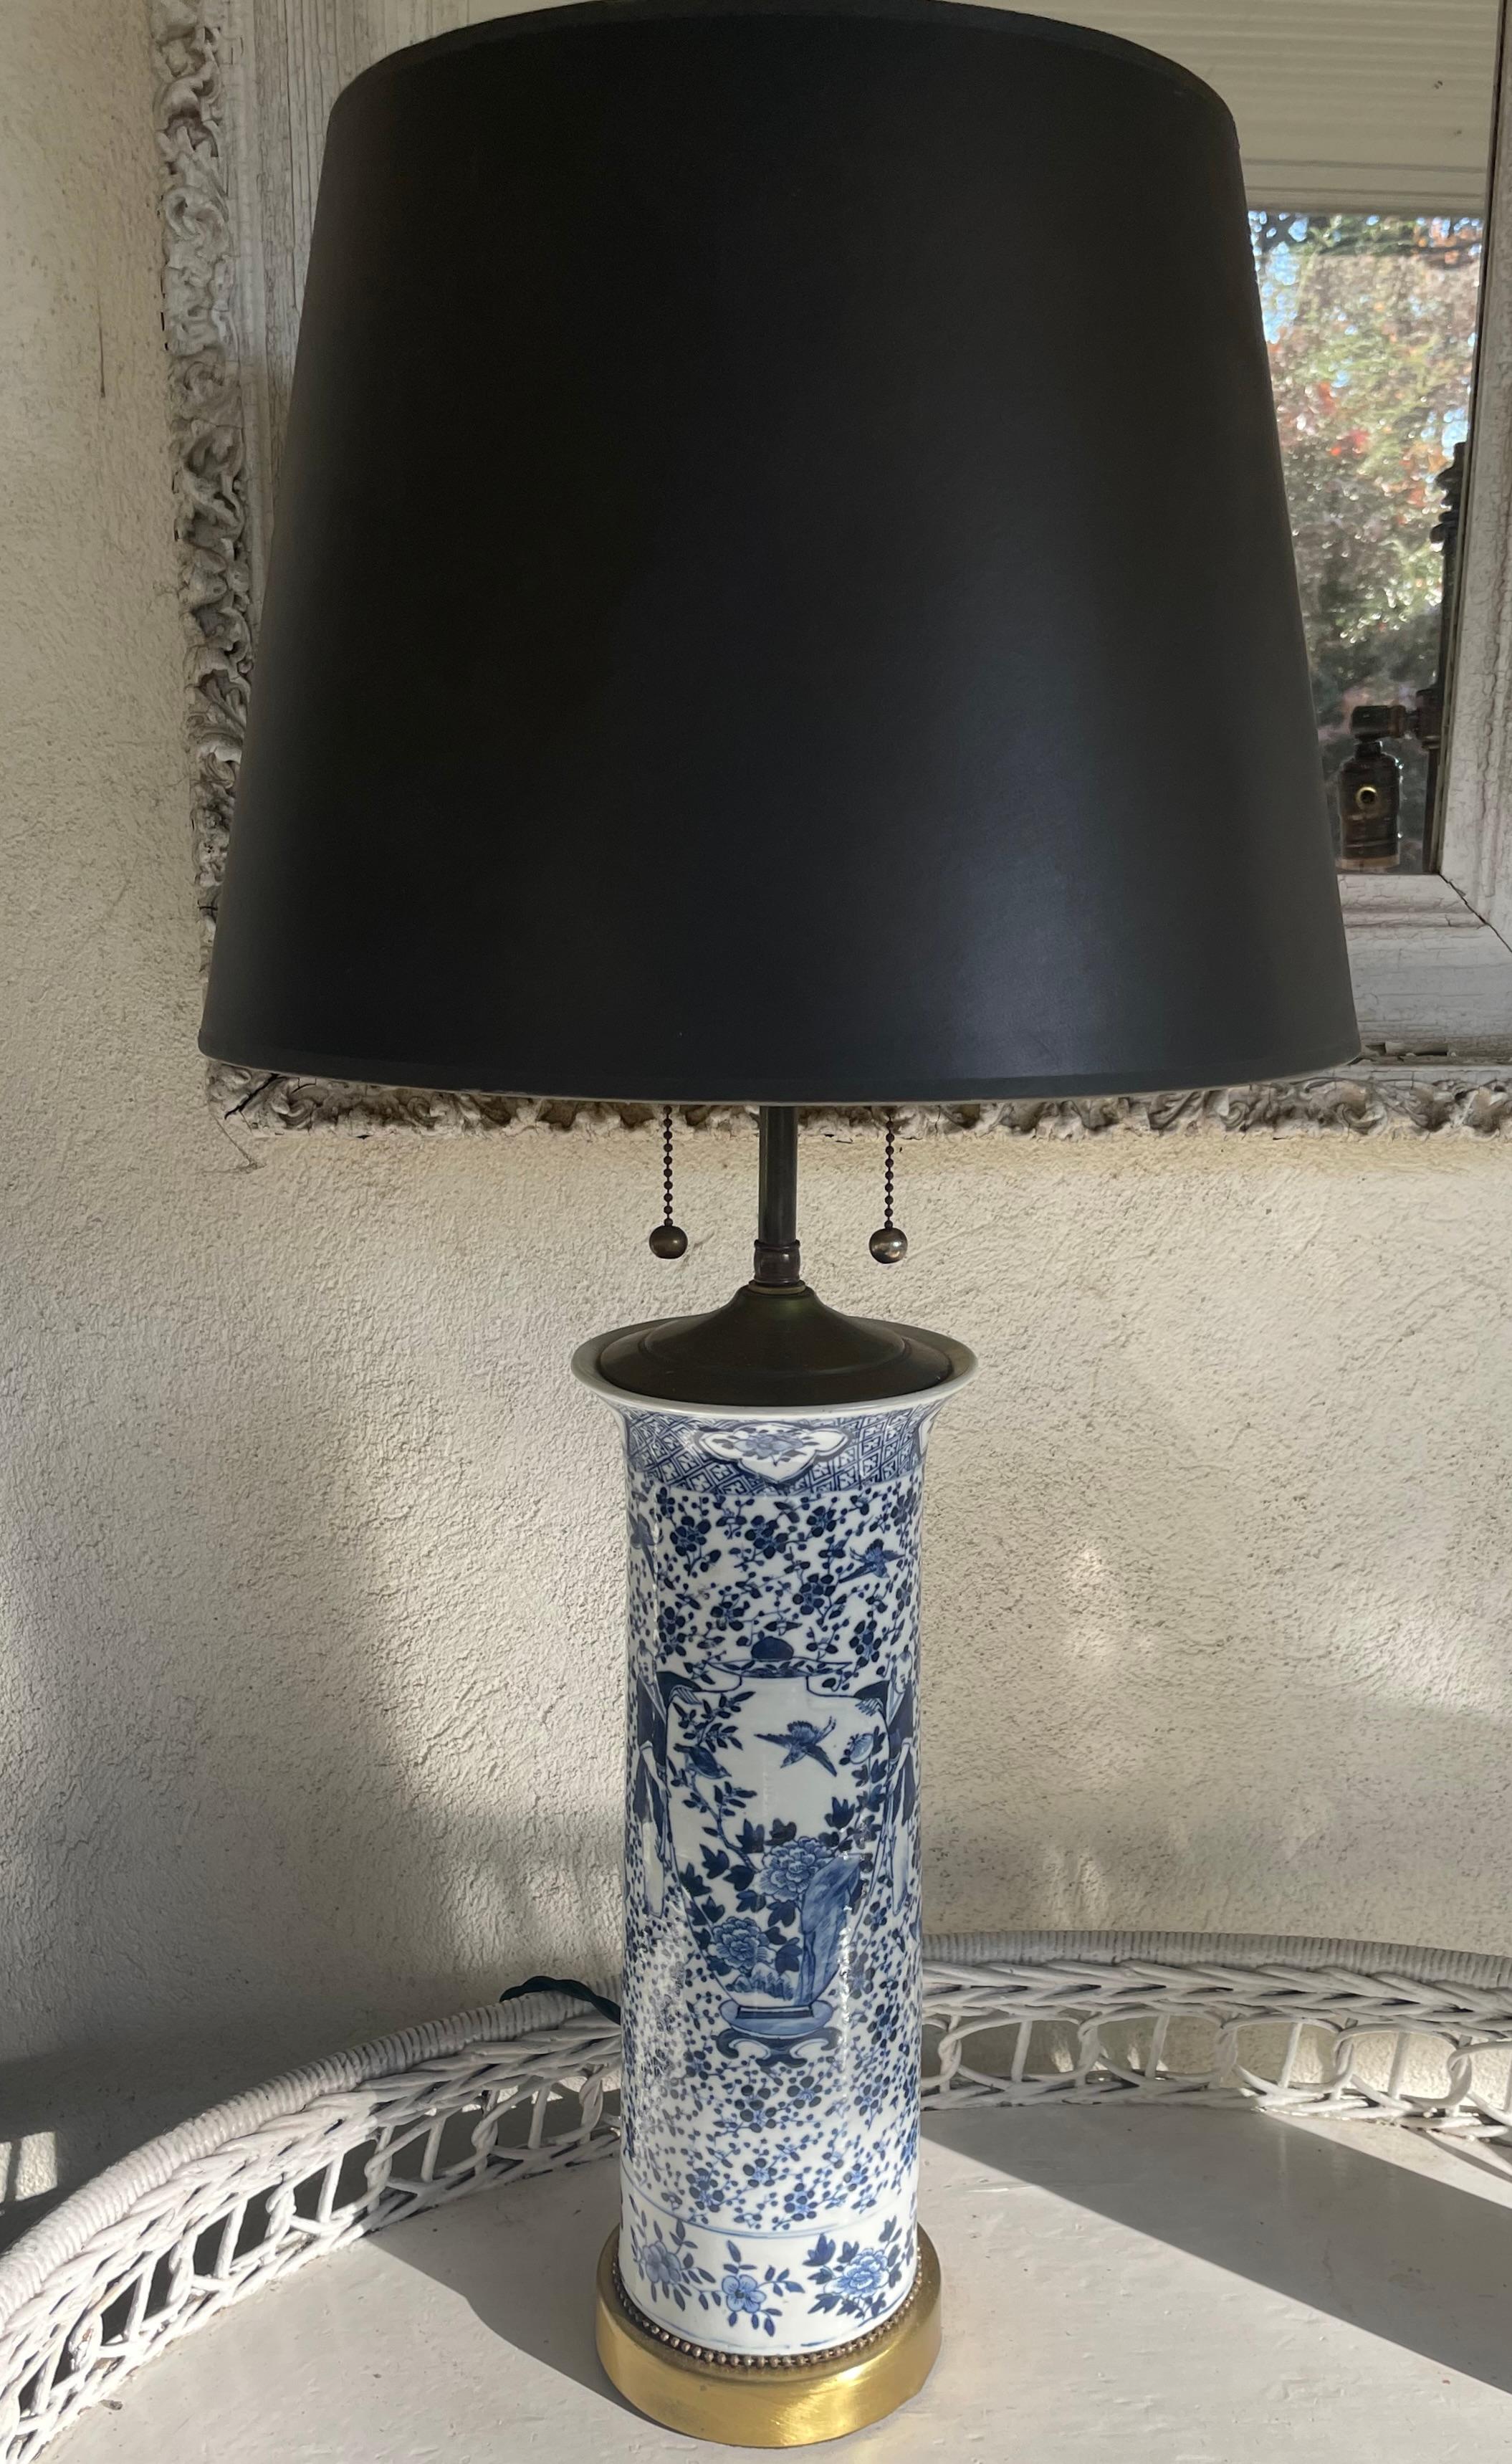 Blue and white Chinese trumpet vase lamps. Pair of tall cylindrical shaped trumpet vases in bright blue and white with Mandarin figures presenting an imperial scale vase with birds flying through floral background and diapered banding with floral